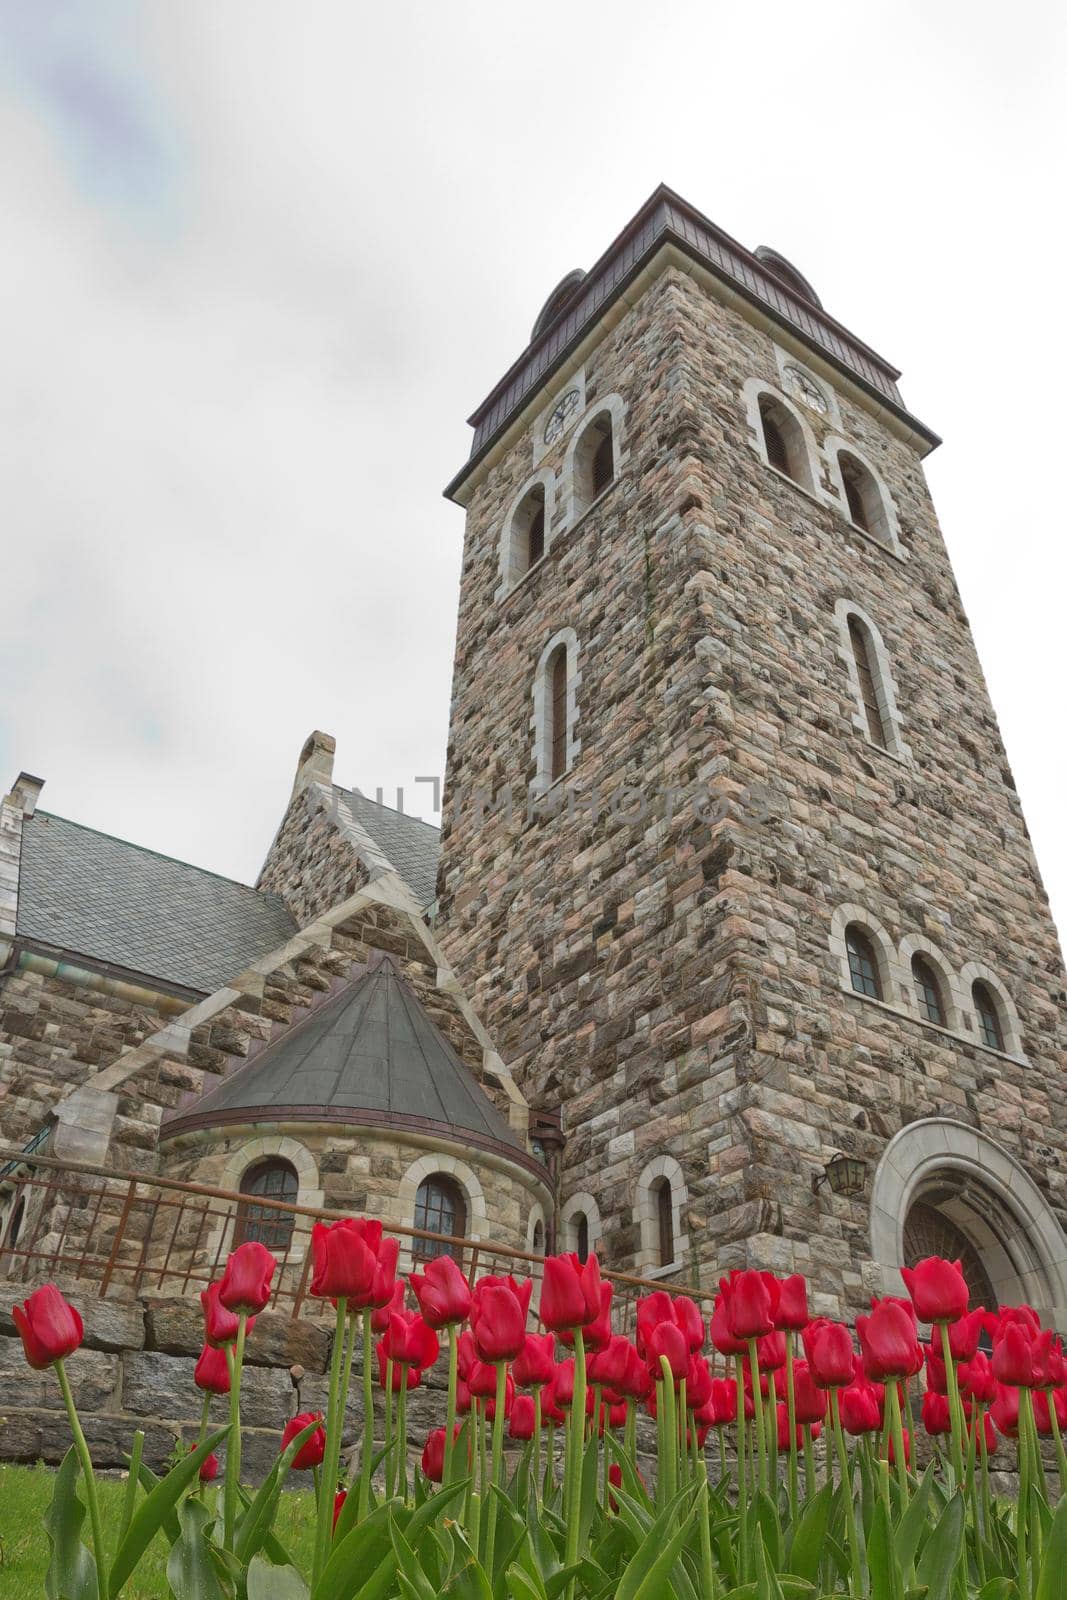 View of a historical stone church in Alesund Norway with red tulips in the foreground.